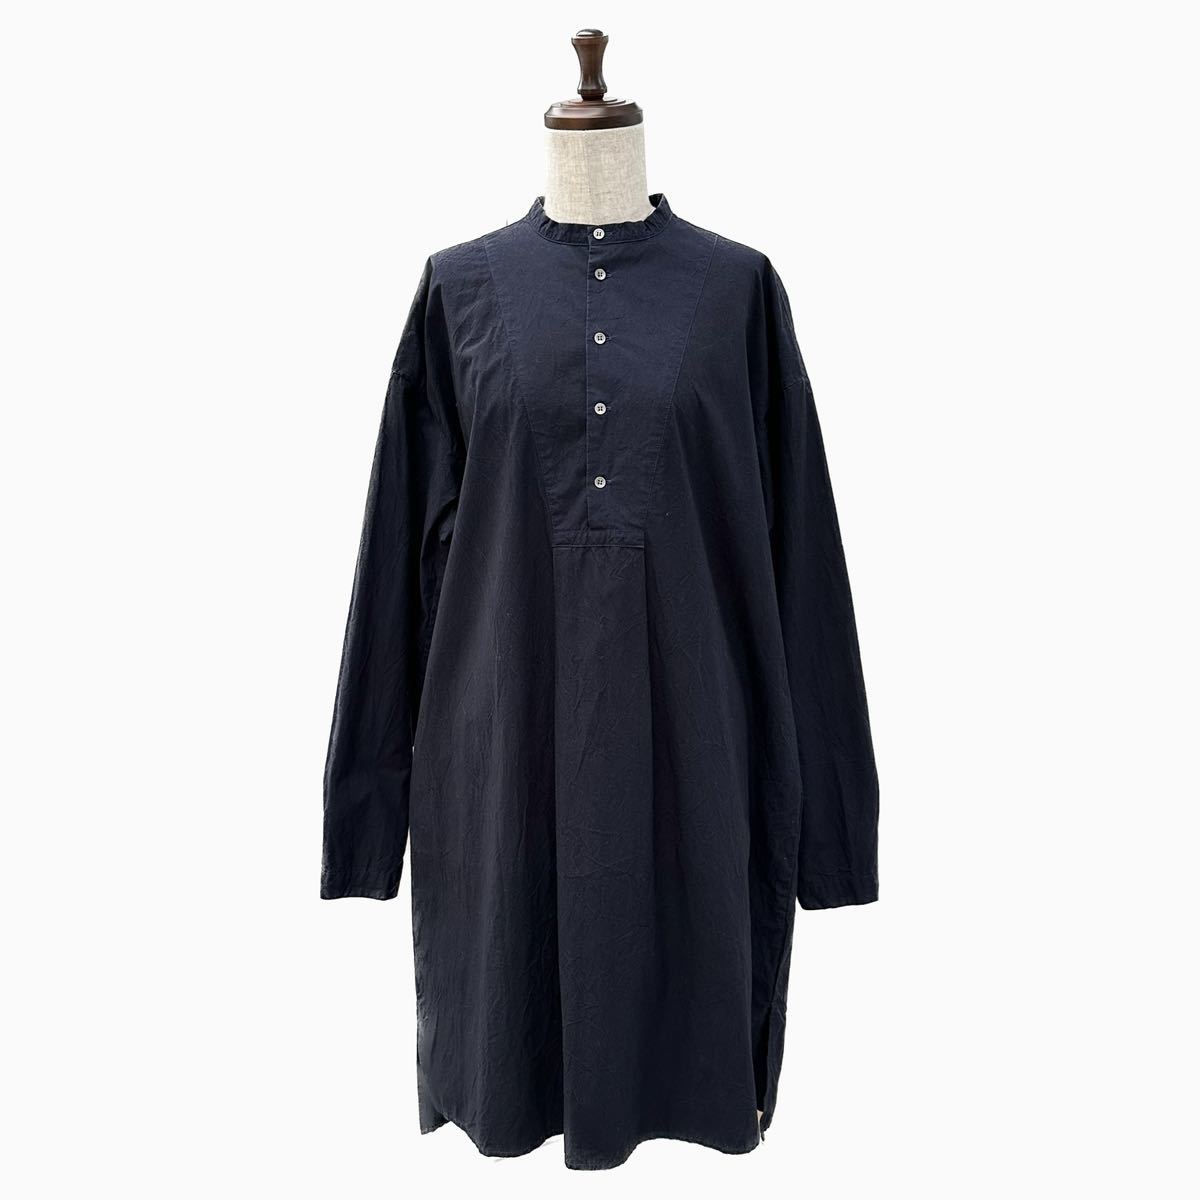 19ss 2019 Veritecoeurvelite cool wrinkle processing pull over shirt tunic One-piece made in Japan navy series size FREE